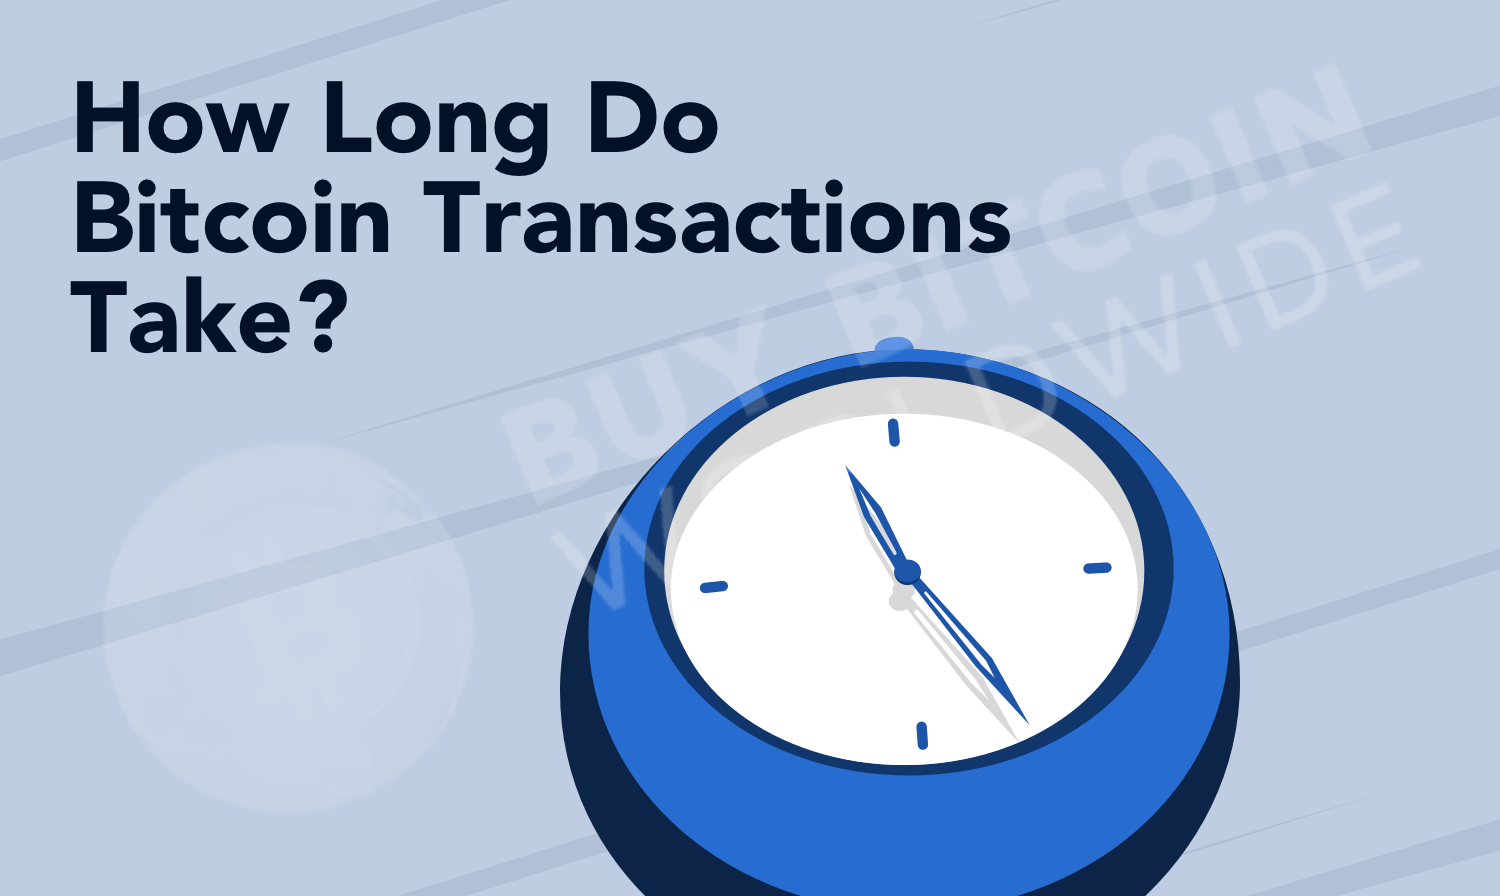 How Long Does It Take to Send Bitcoin?